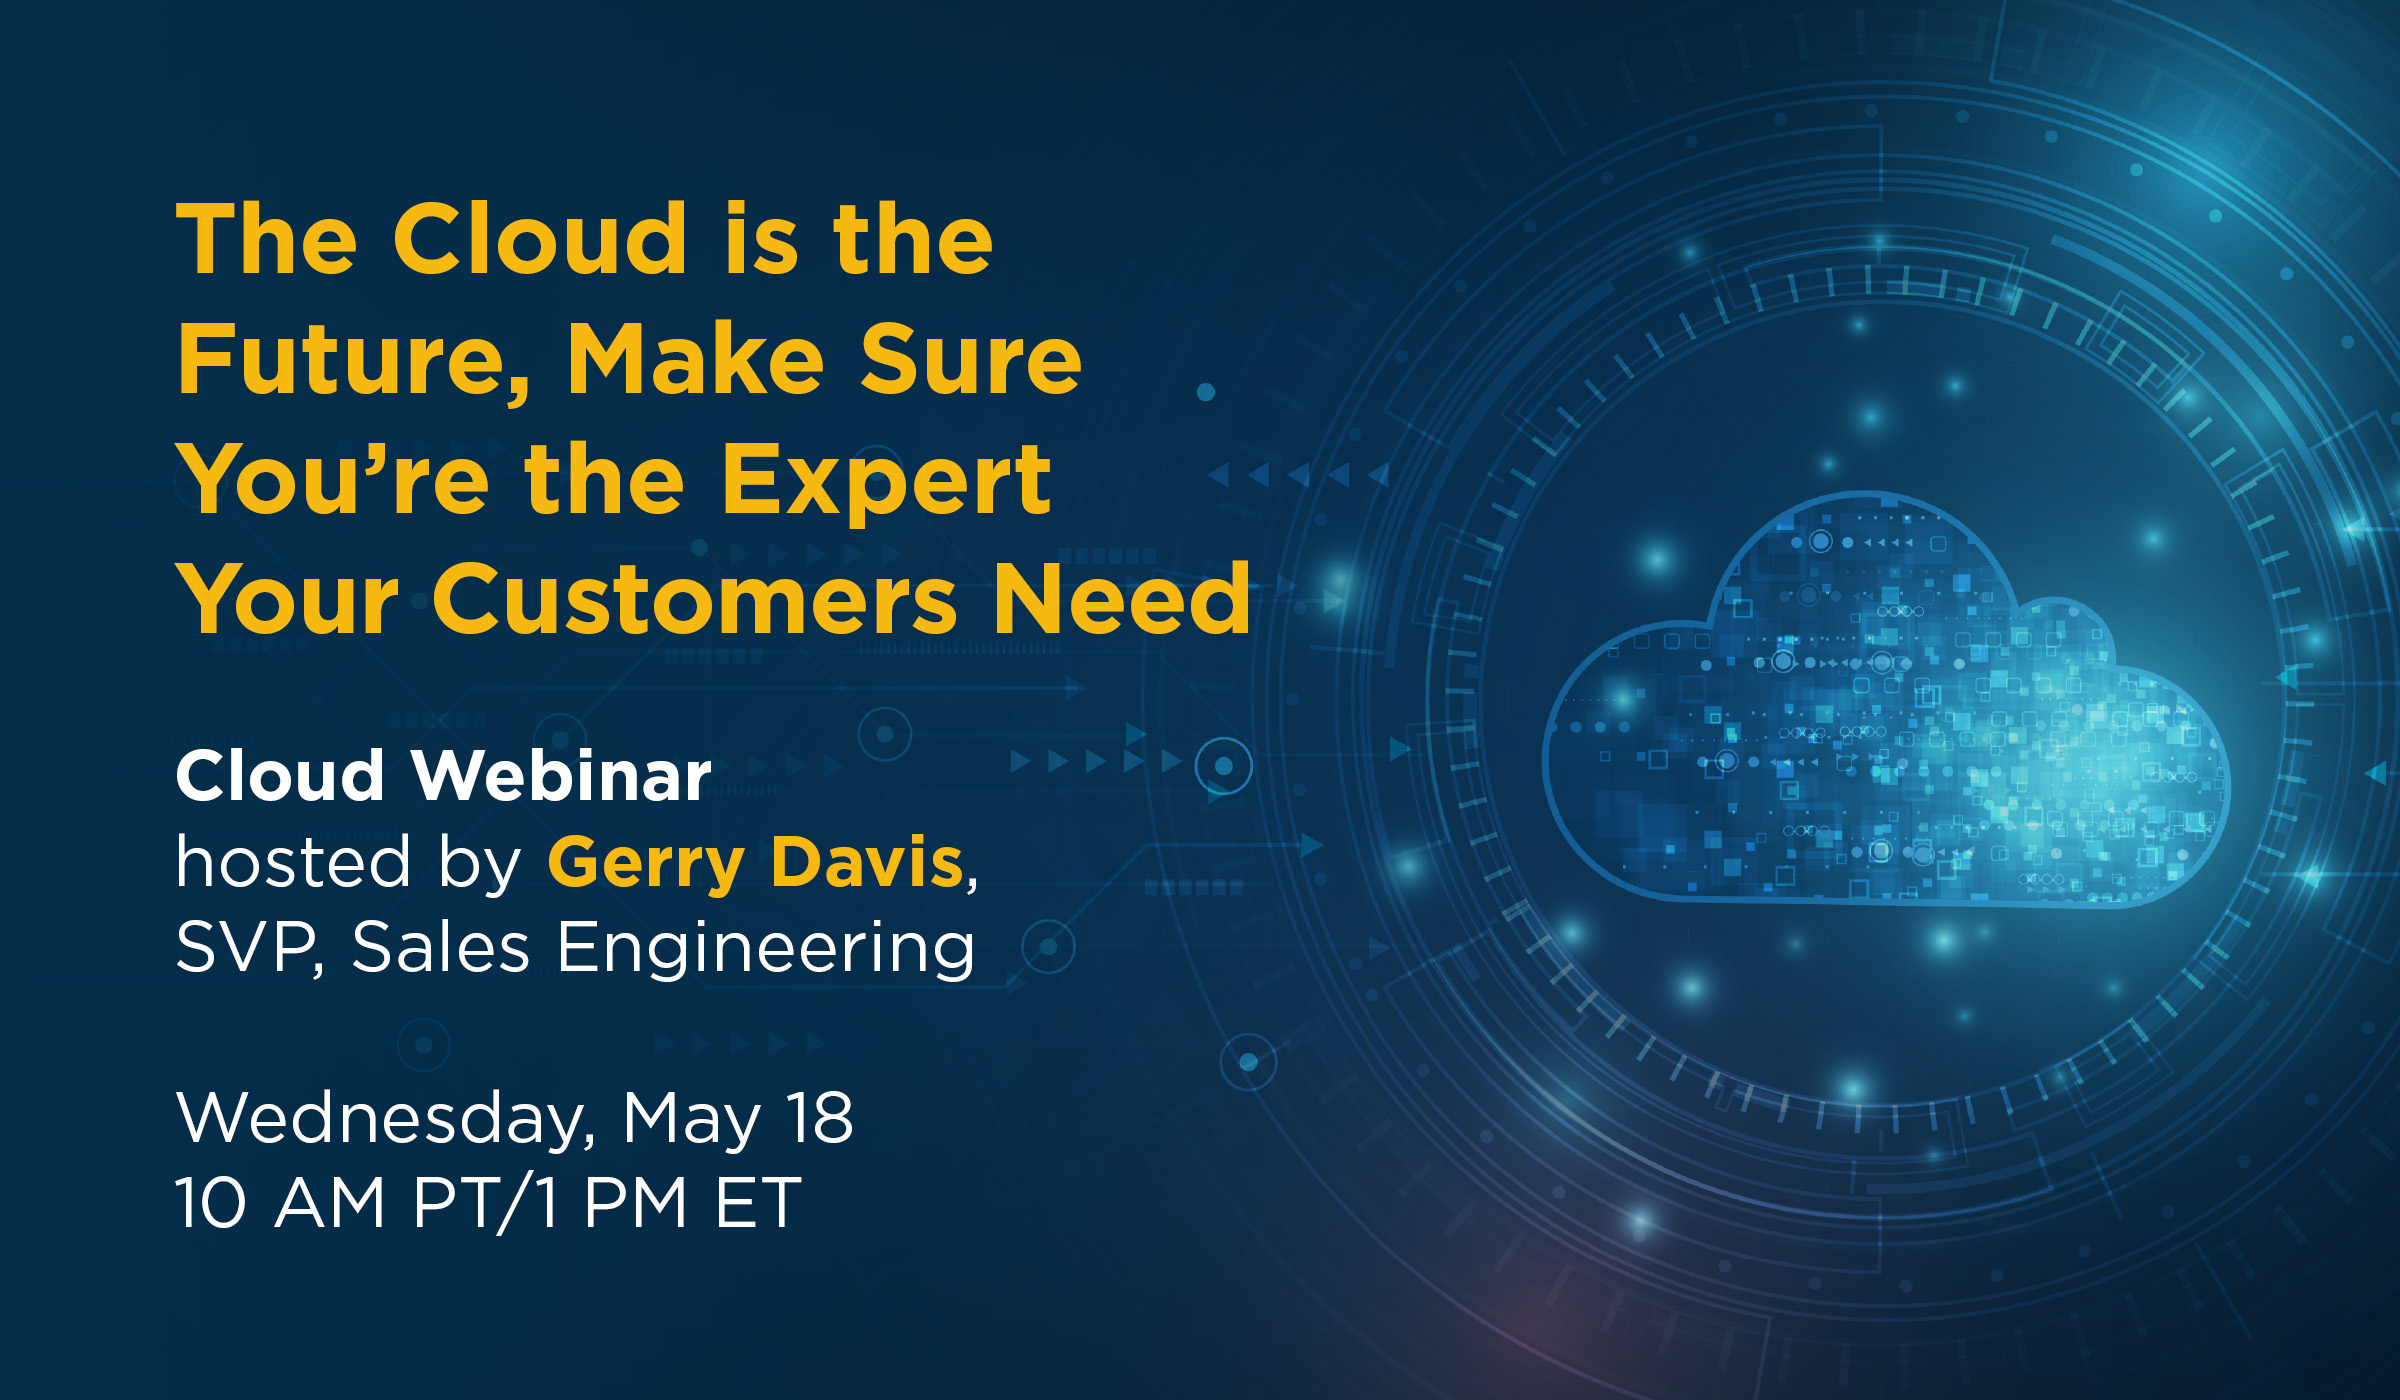 The Cloud is the Future, Make Sure You're the Expert Your Customers Need Cloud Webinar